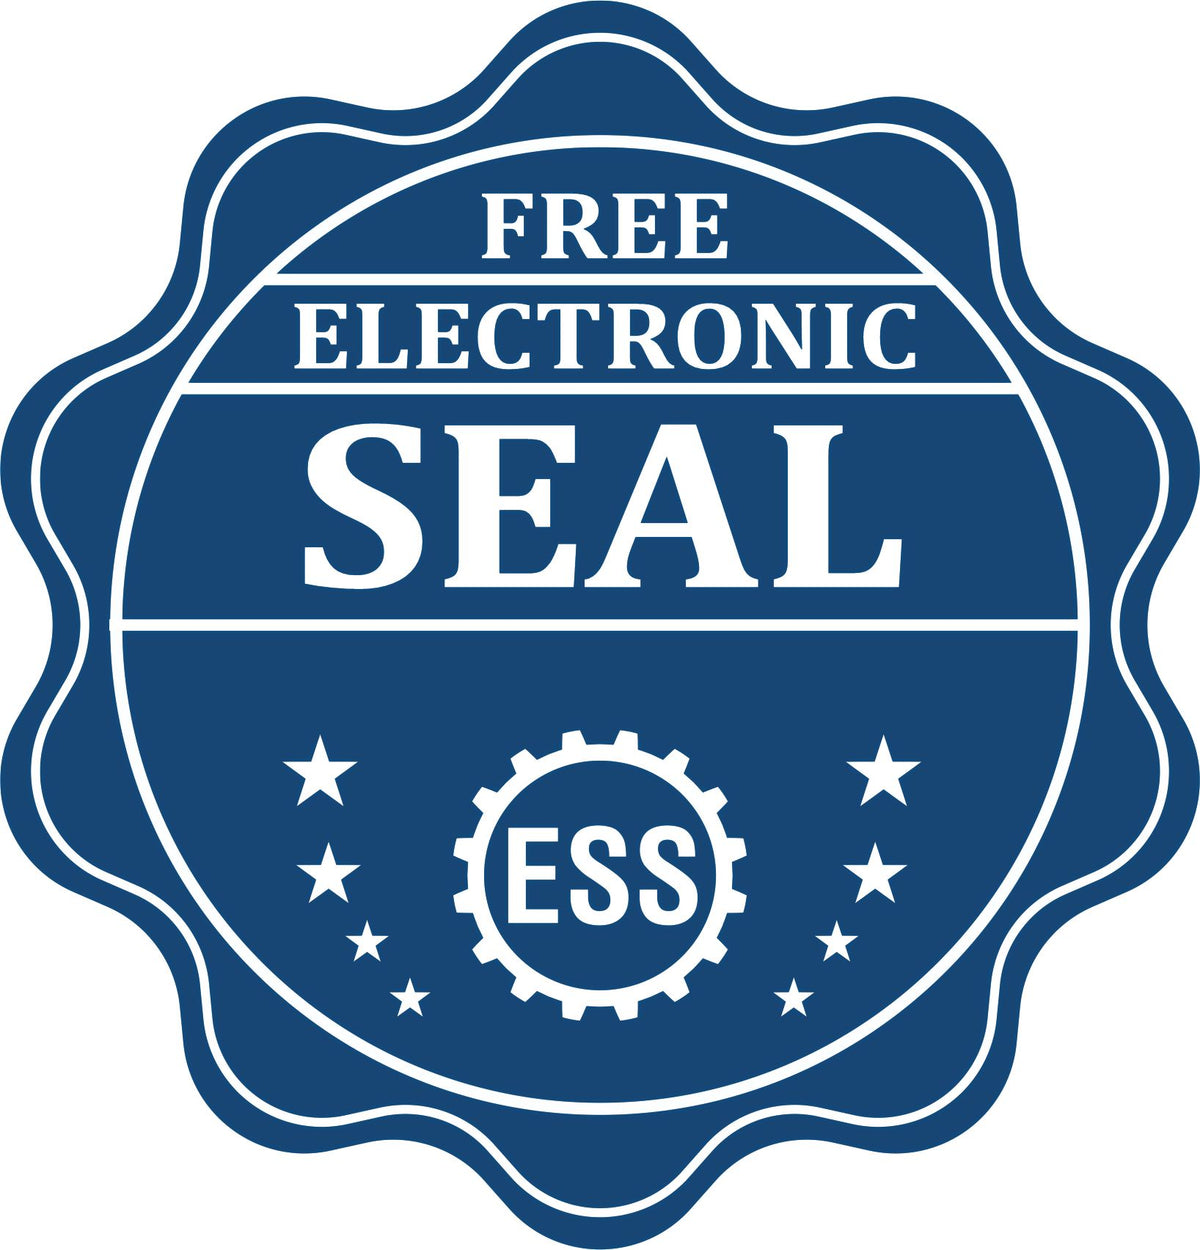 A badge showing a free electronic seal for the State of Alabama Long Reach Architectural Embossing Seal with stars and the ESS gear on the emblem.